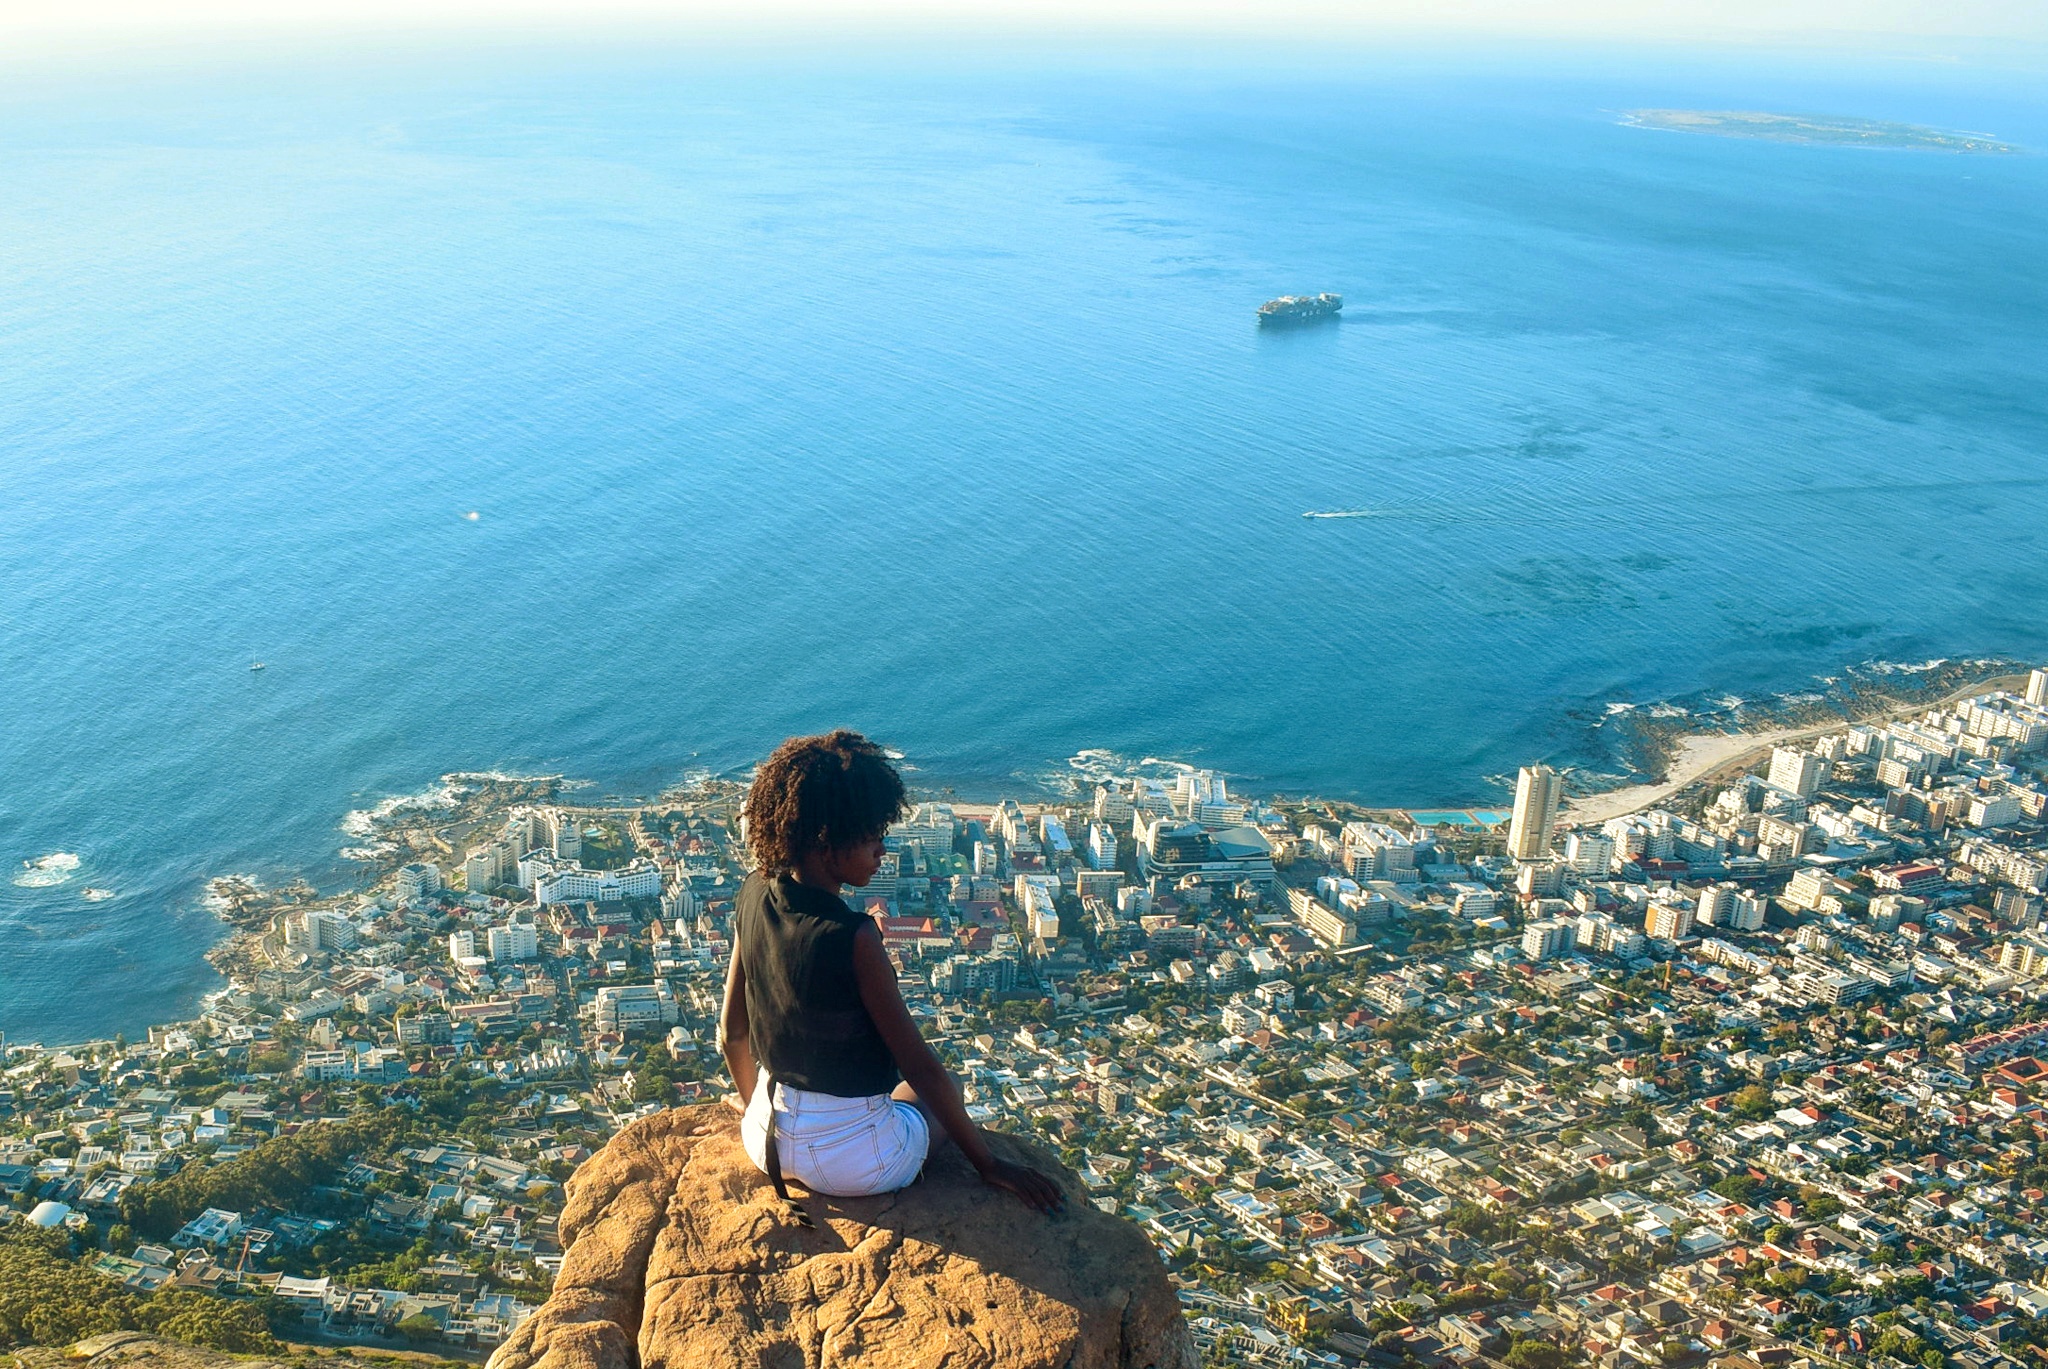 30 Travel Photos from South Africa to Inspire Your Next Trip| Advice to anyone planning a trip to South Africa via a photo inspiration of places to visit beyond Johannesburg and Cape Town